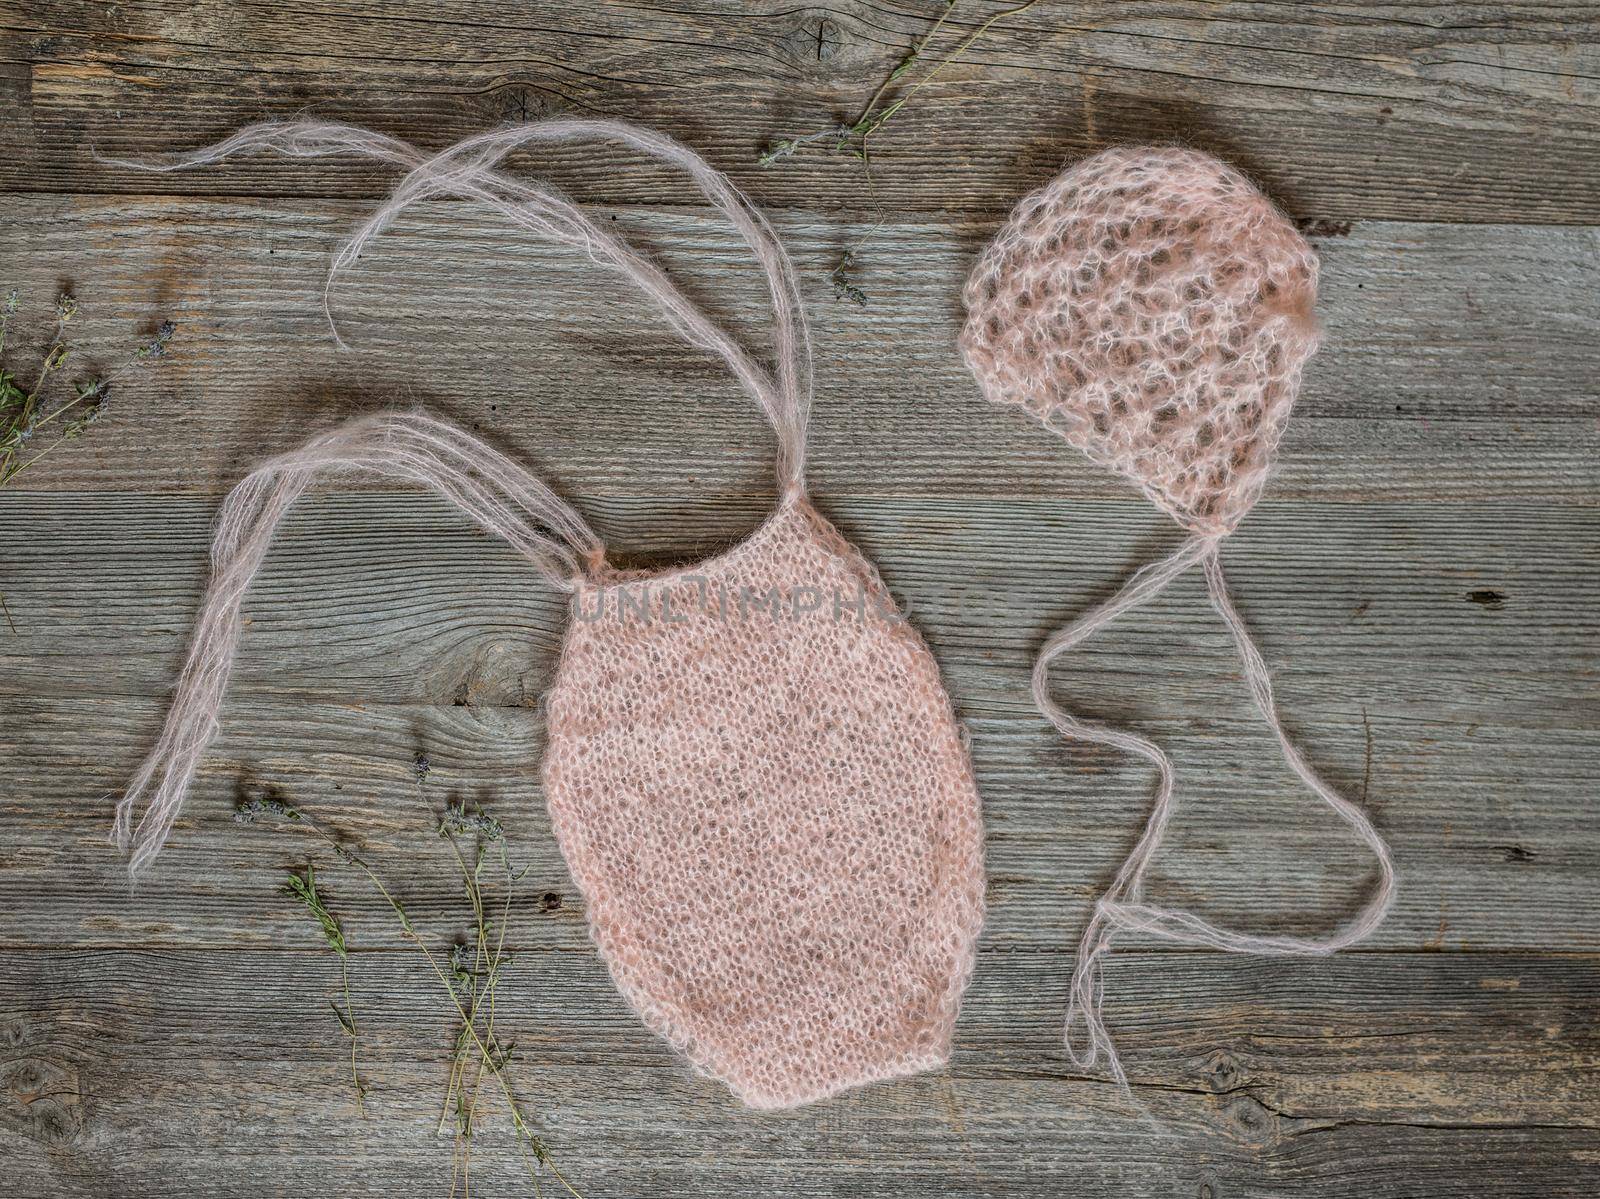 two little knitted pink woolen hats for newborn baby, top view